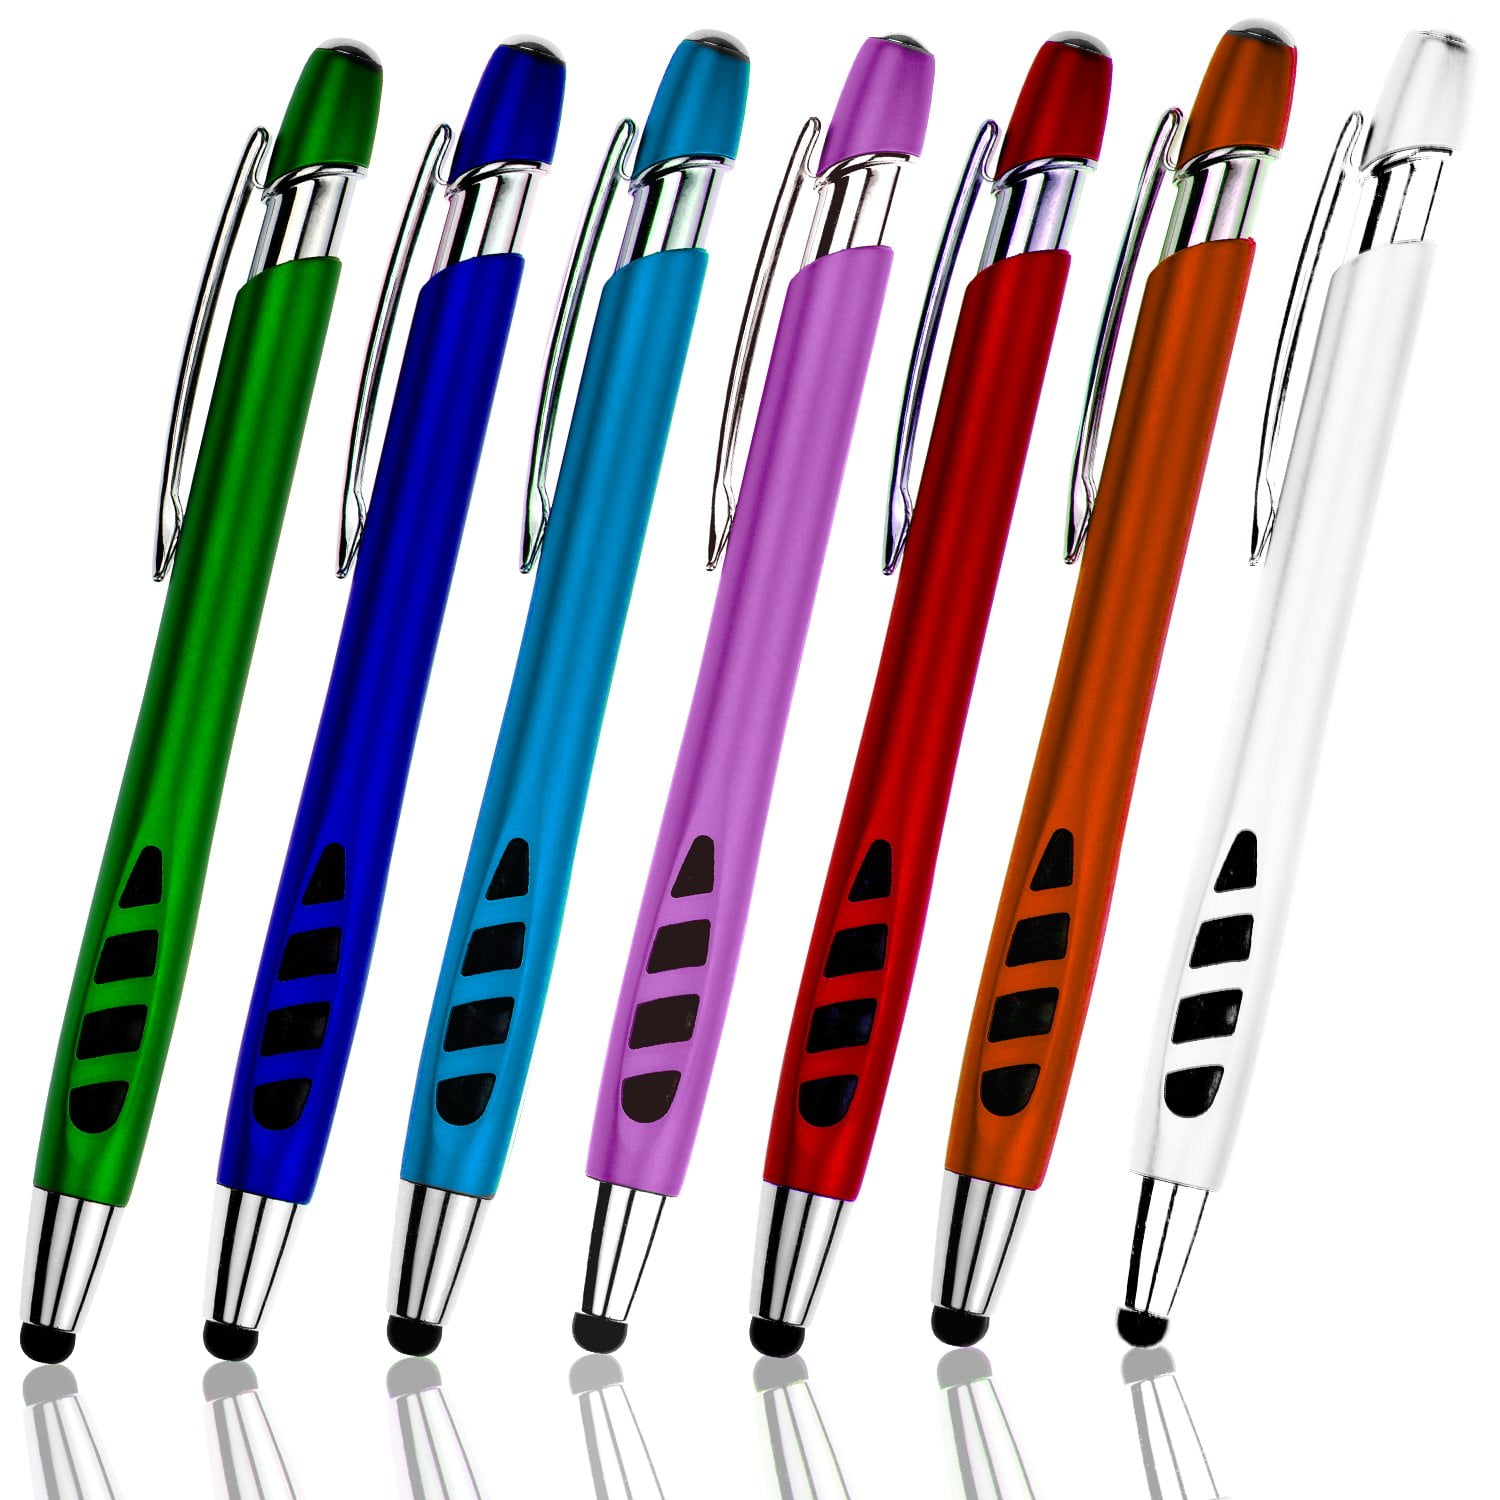 8x COLORFUL Capacitive Pen Touch Stylus FOR PC Tablet 9.7" 10" 10.1" 4th 